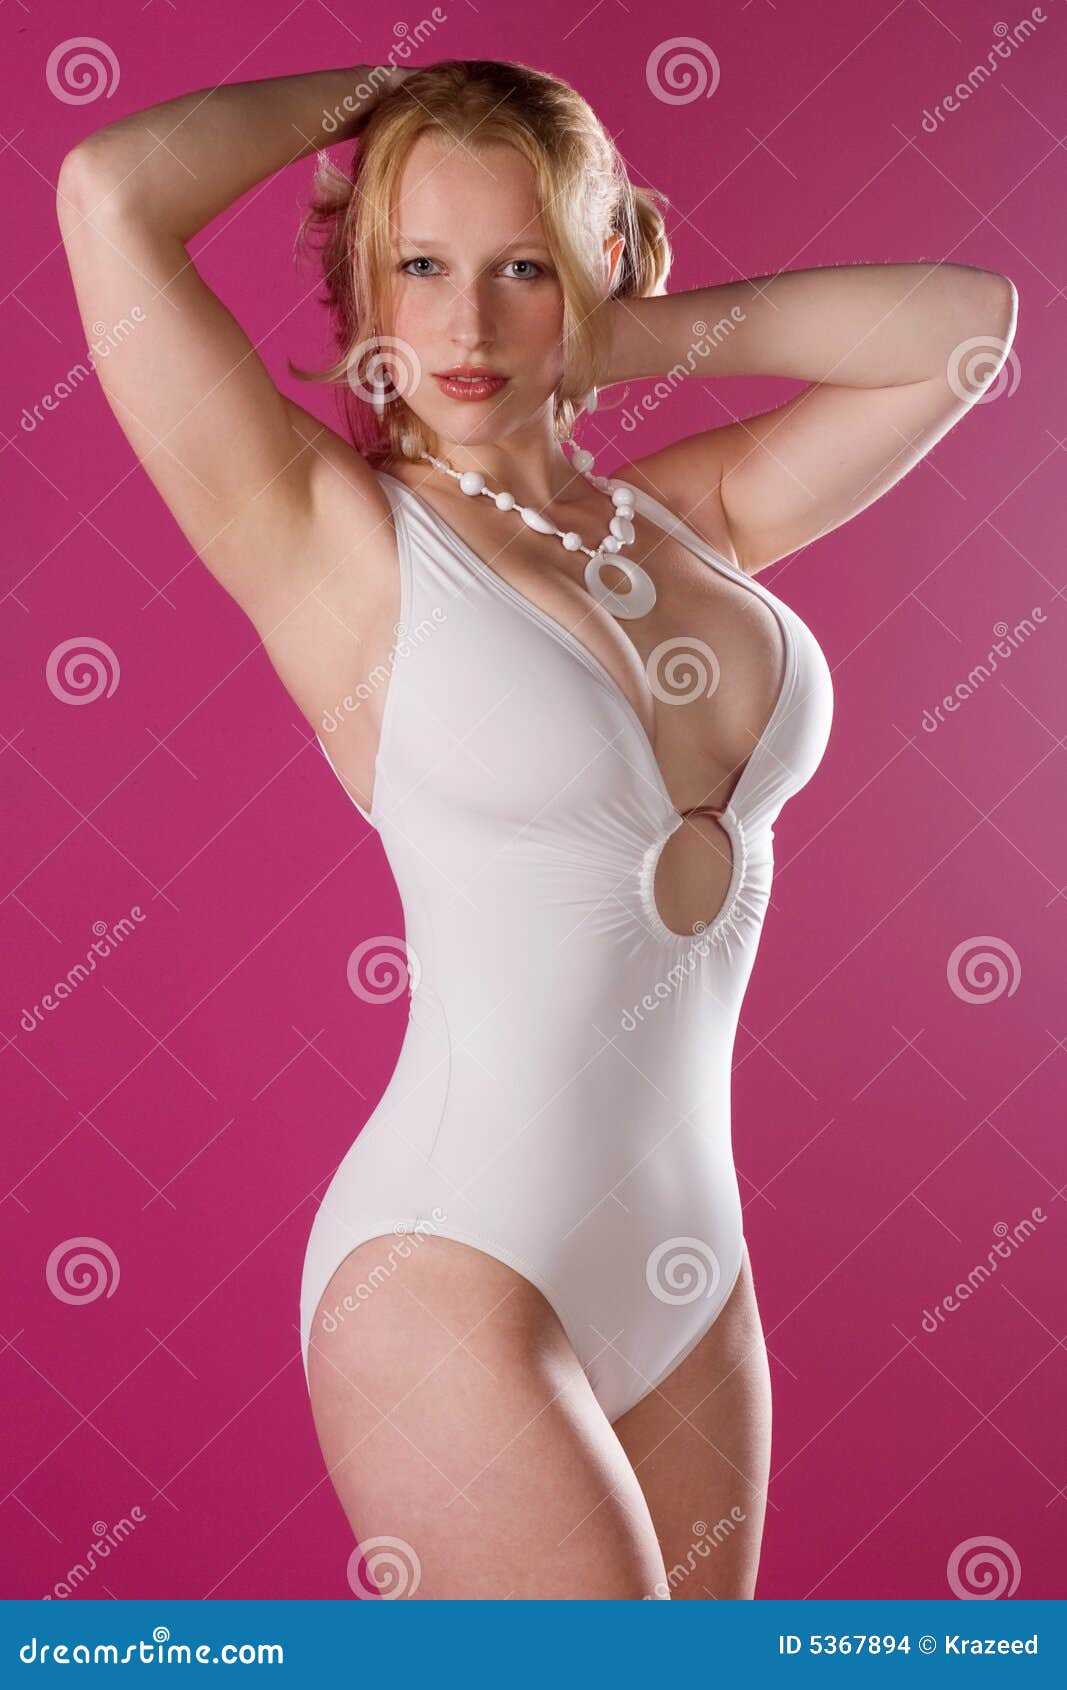 Blonde In Pin Up Pose Stock Images Image 5367894